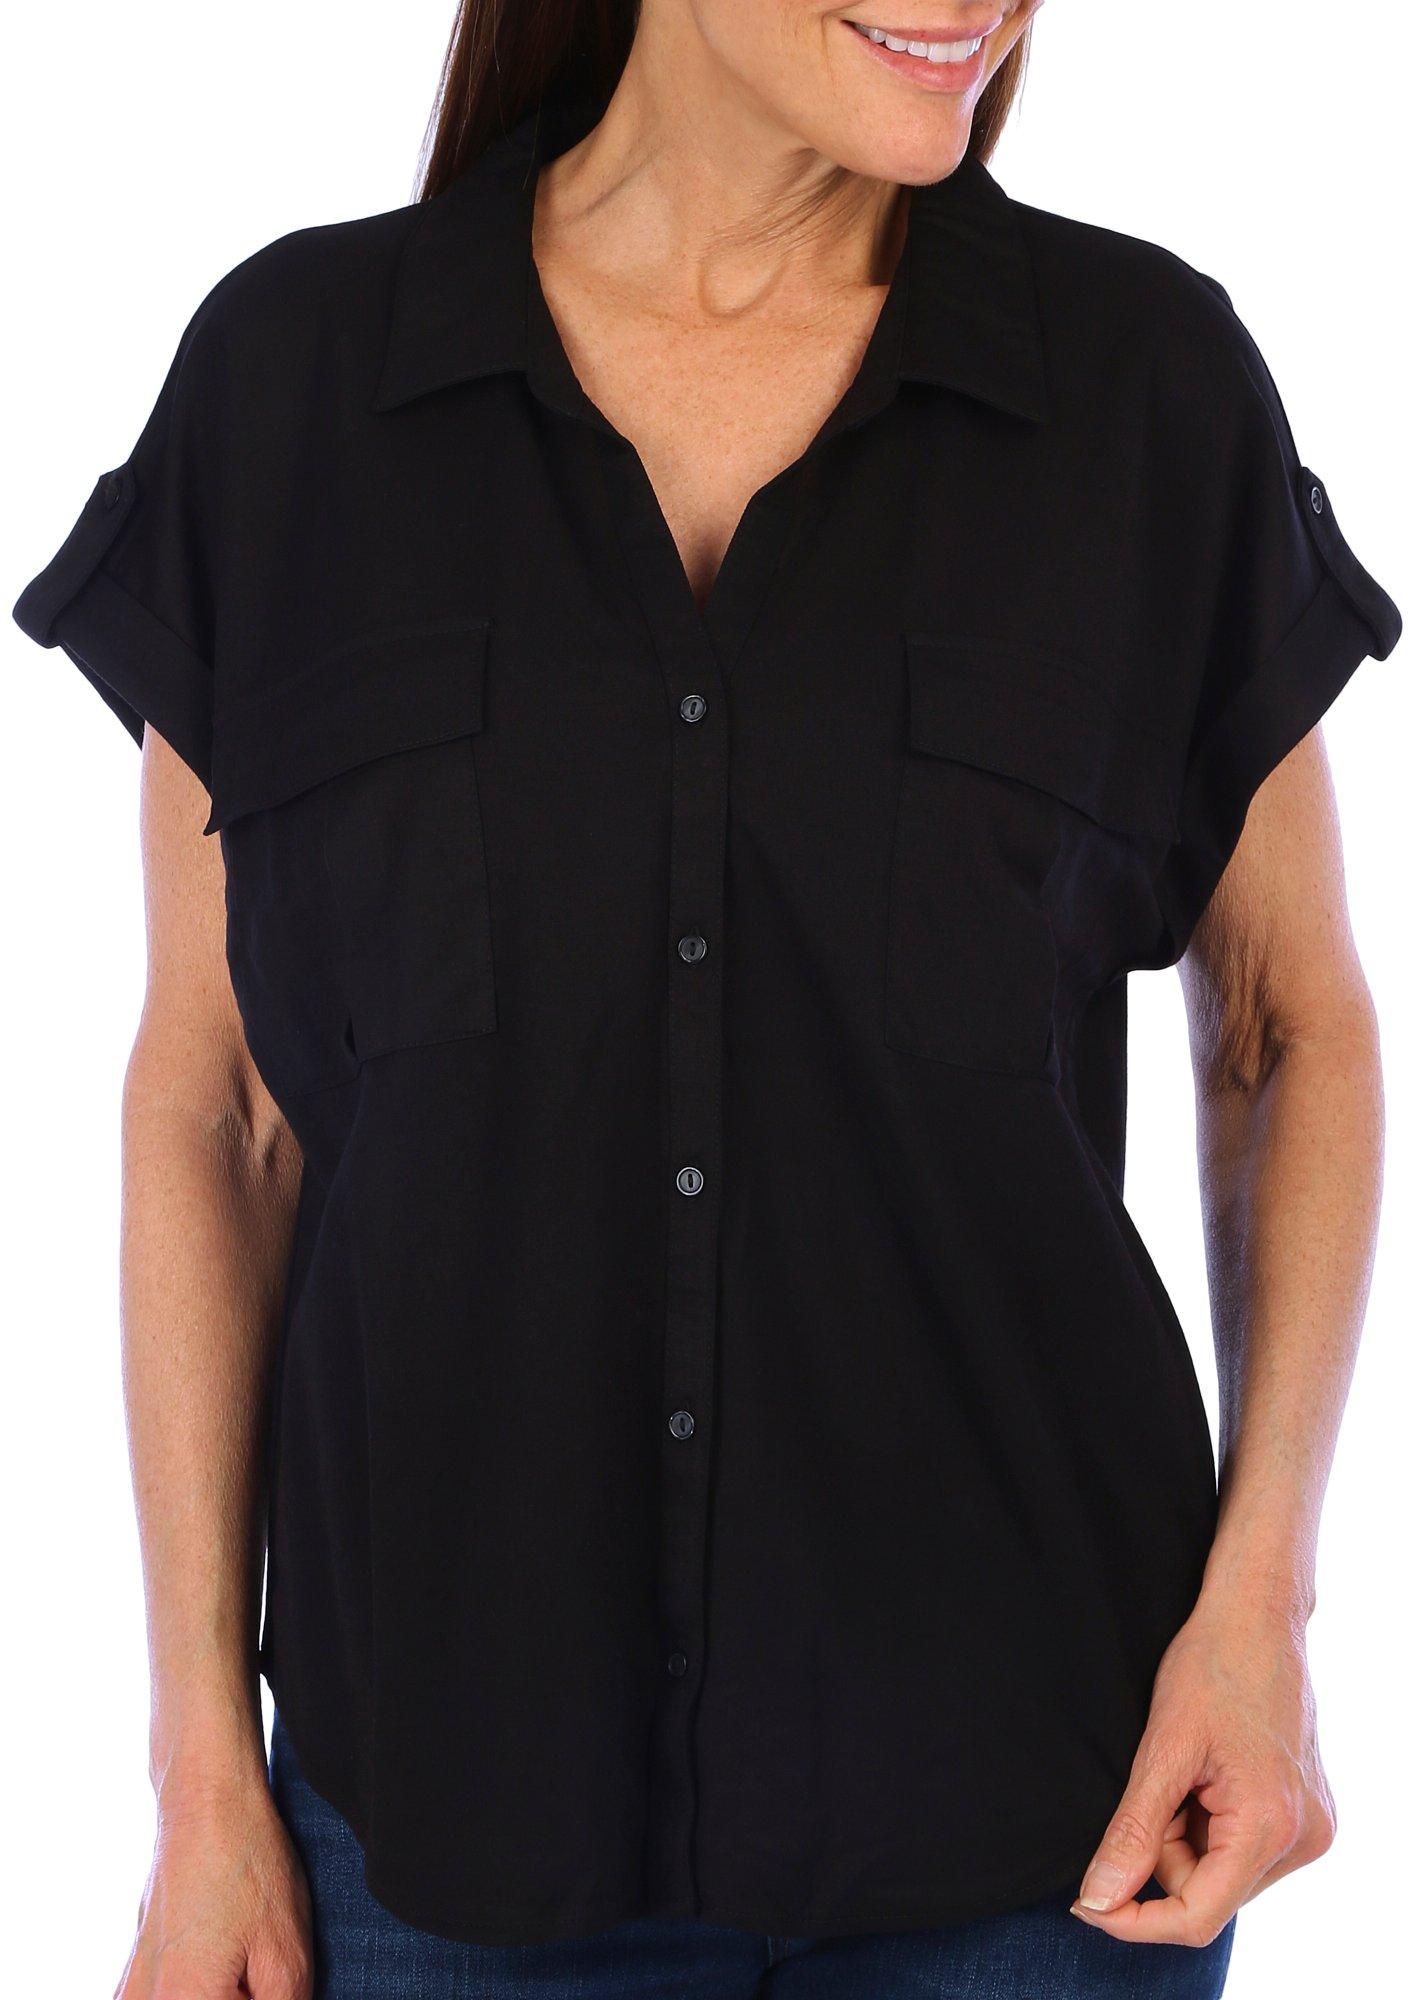 Womens Solid Split Neck Button Down Short Sleeve Top